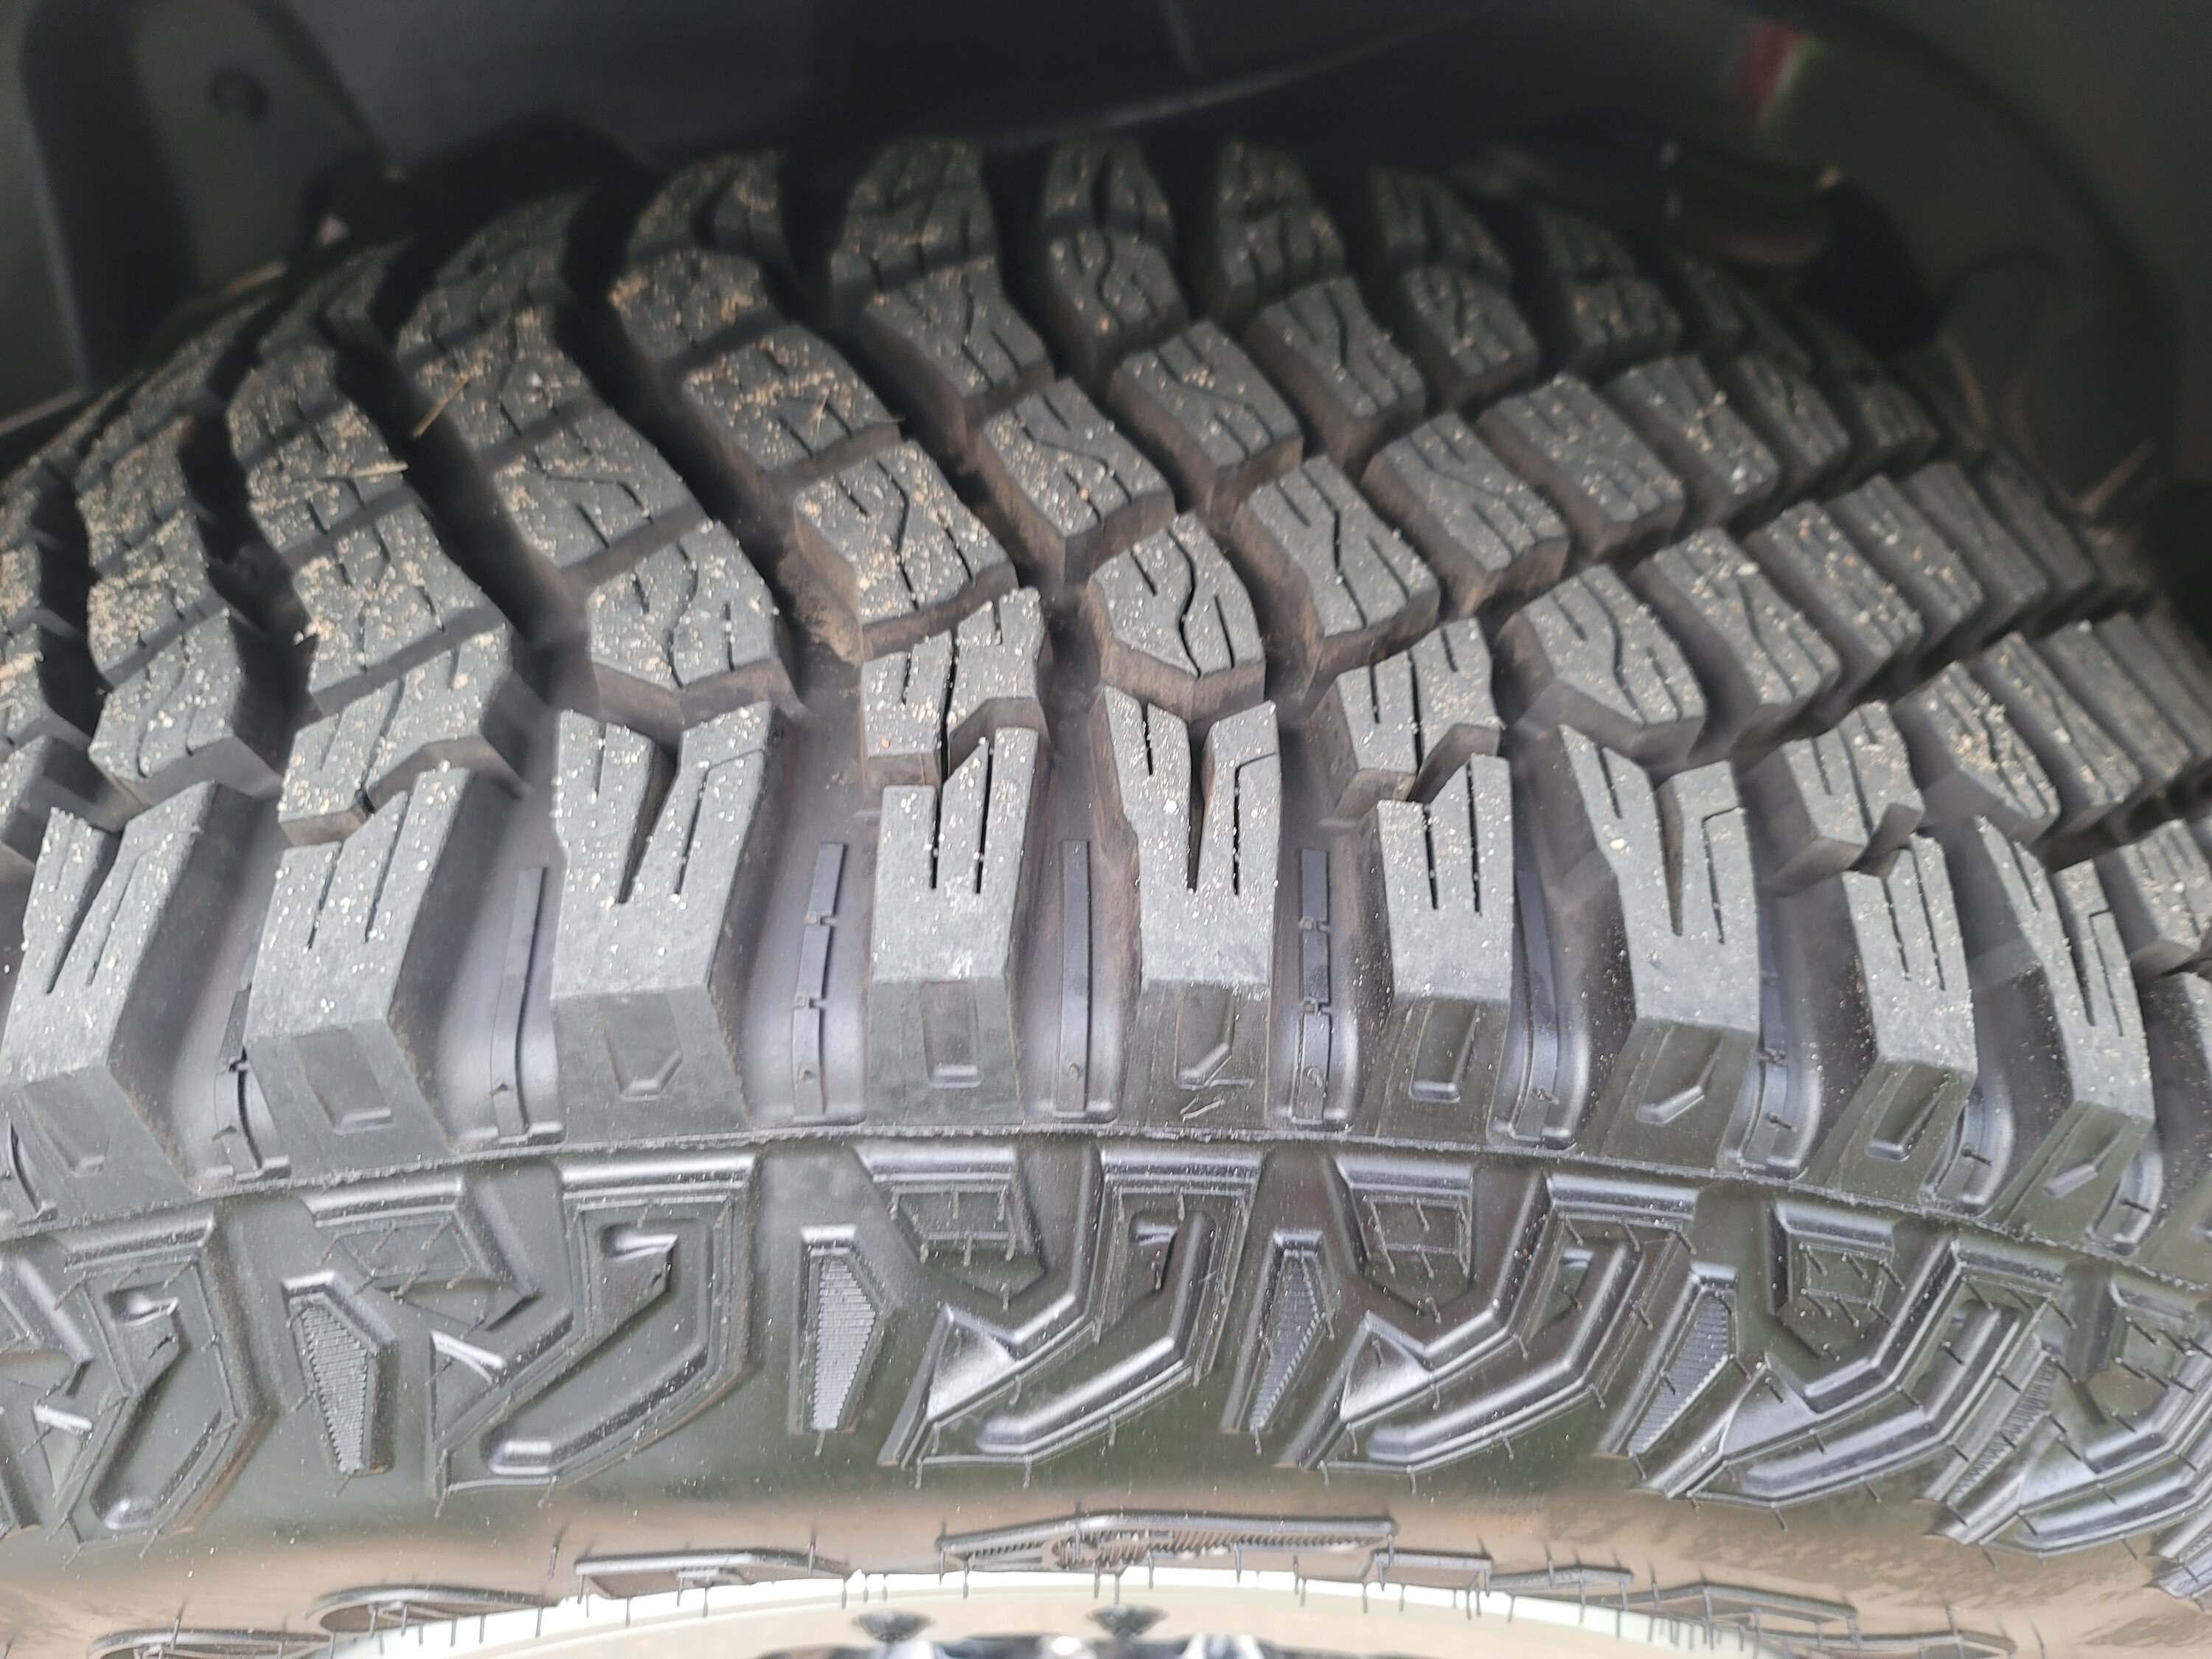 Ford Bronco Sasquatch Wheels and Tires - (Full Set Of 5) -- $1,800 20220811_080357